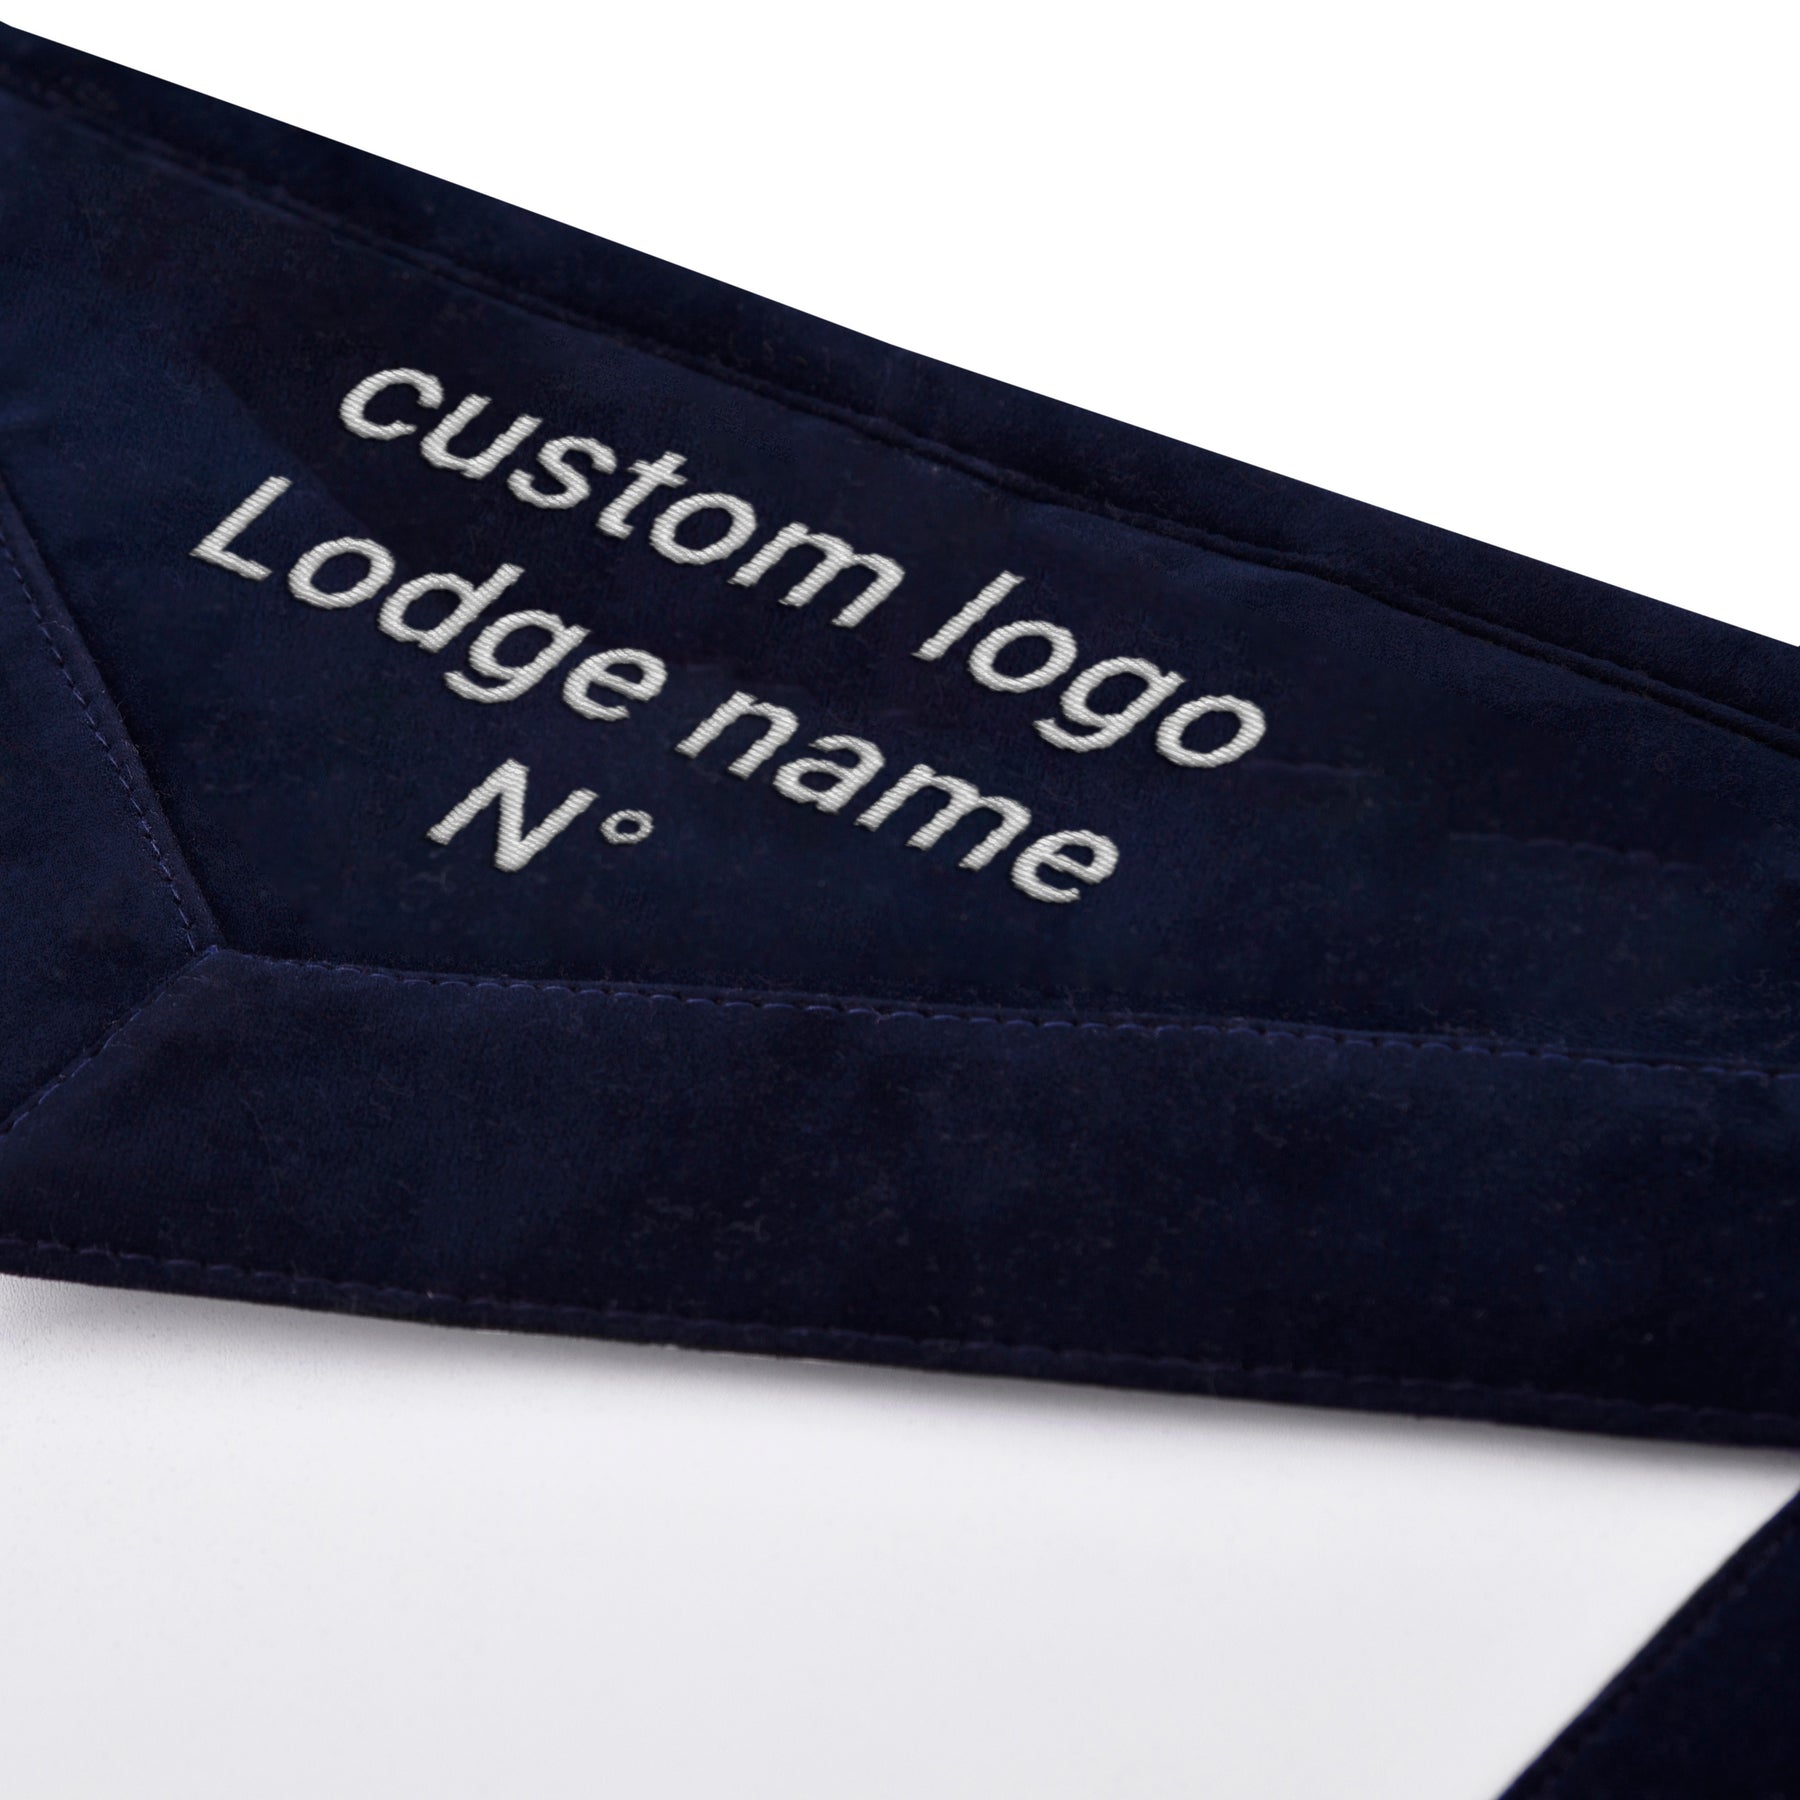 Secretary Blue Lodge Officer Apron - Navy Velvet With Silver Embroidery Thread